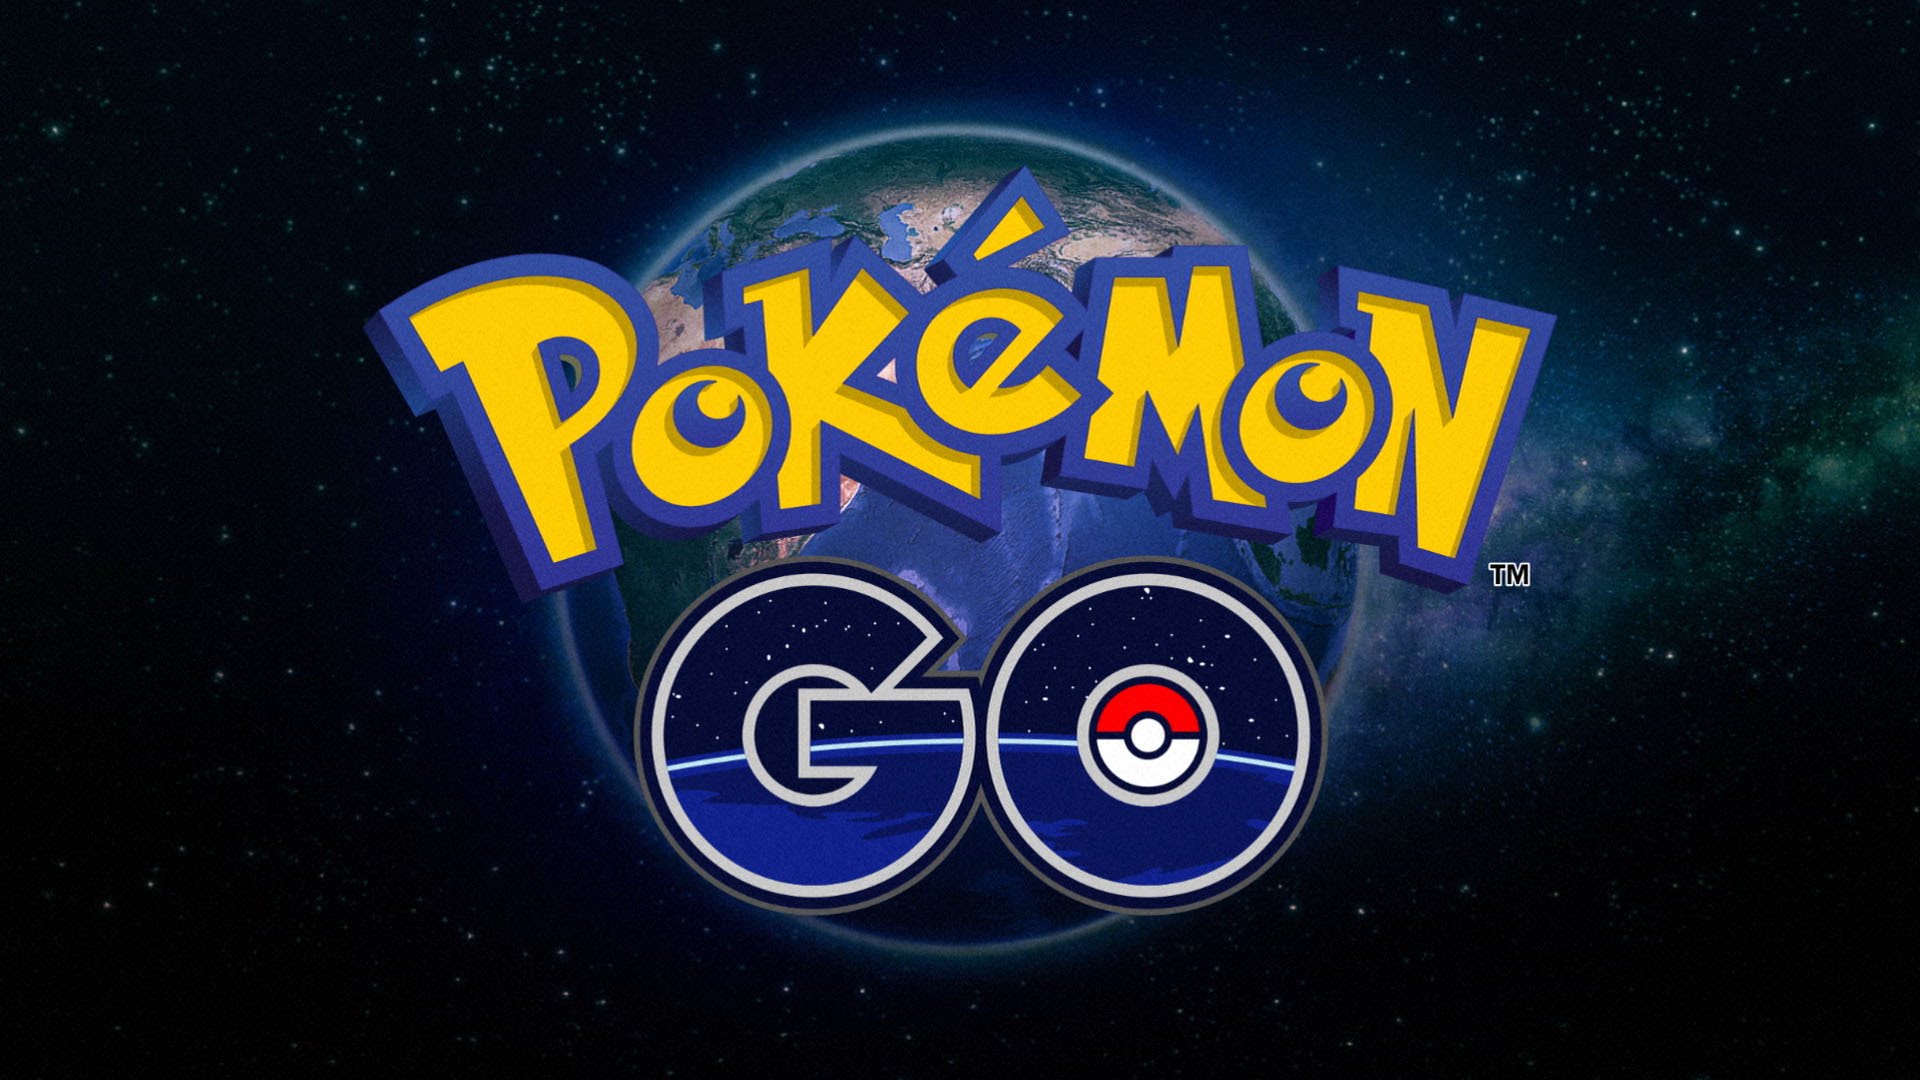 Pokémon Go Is The Greatest Mobile Game Ever?